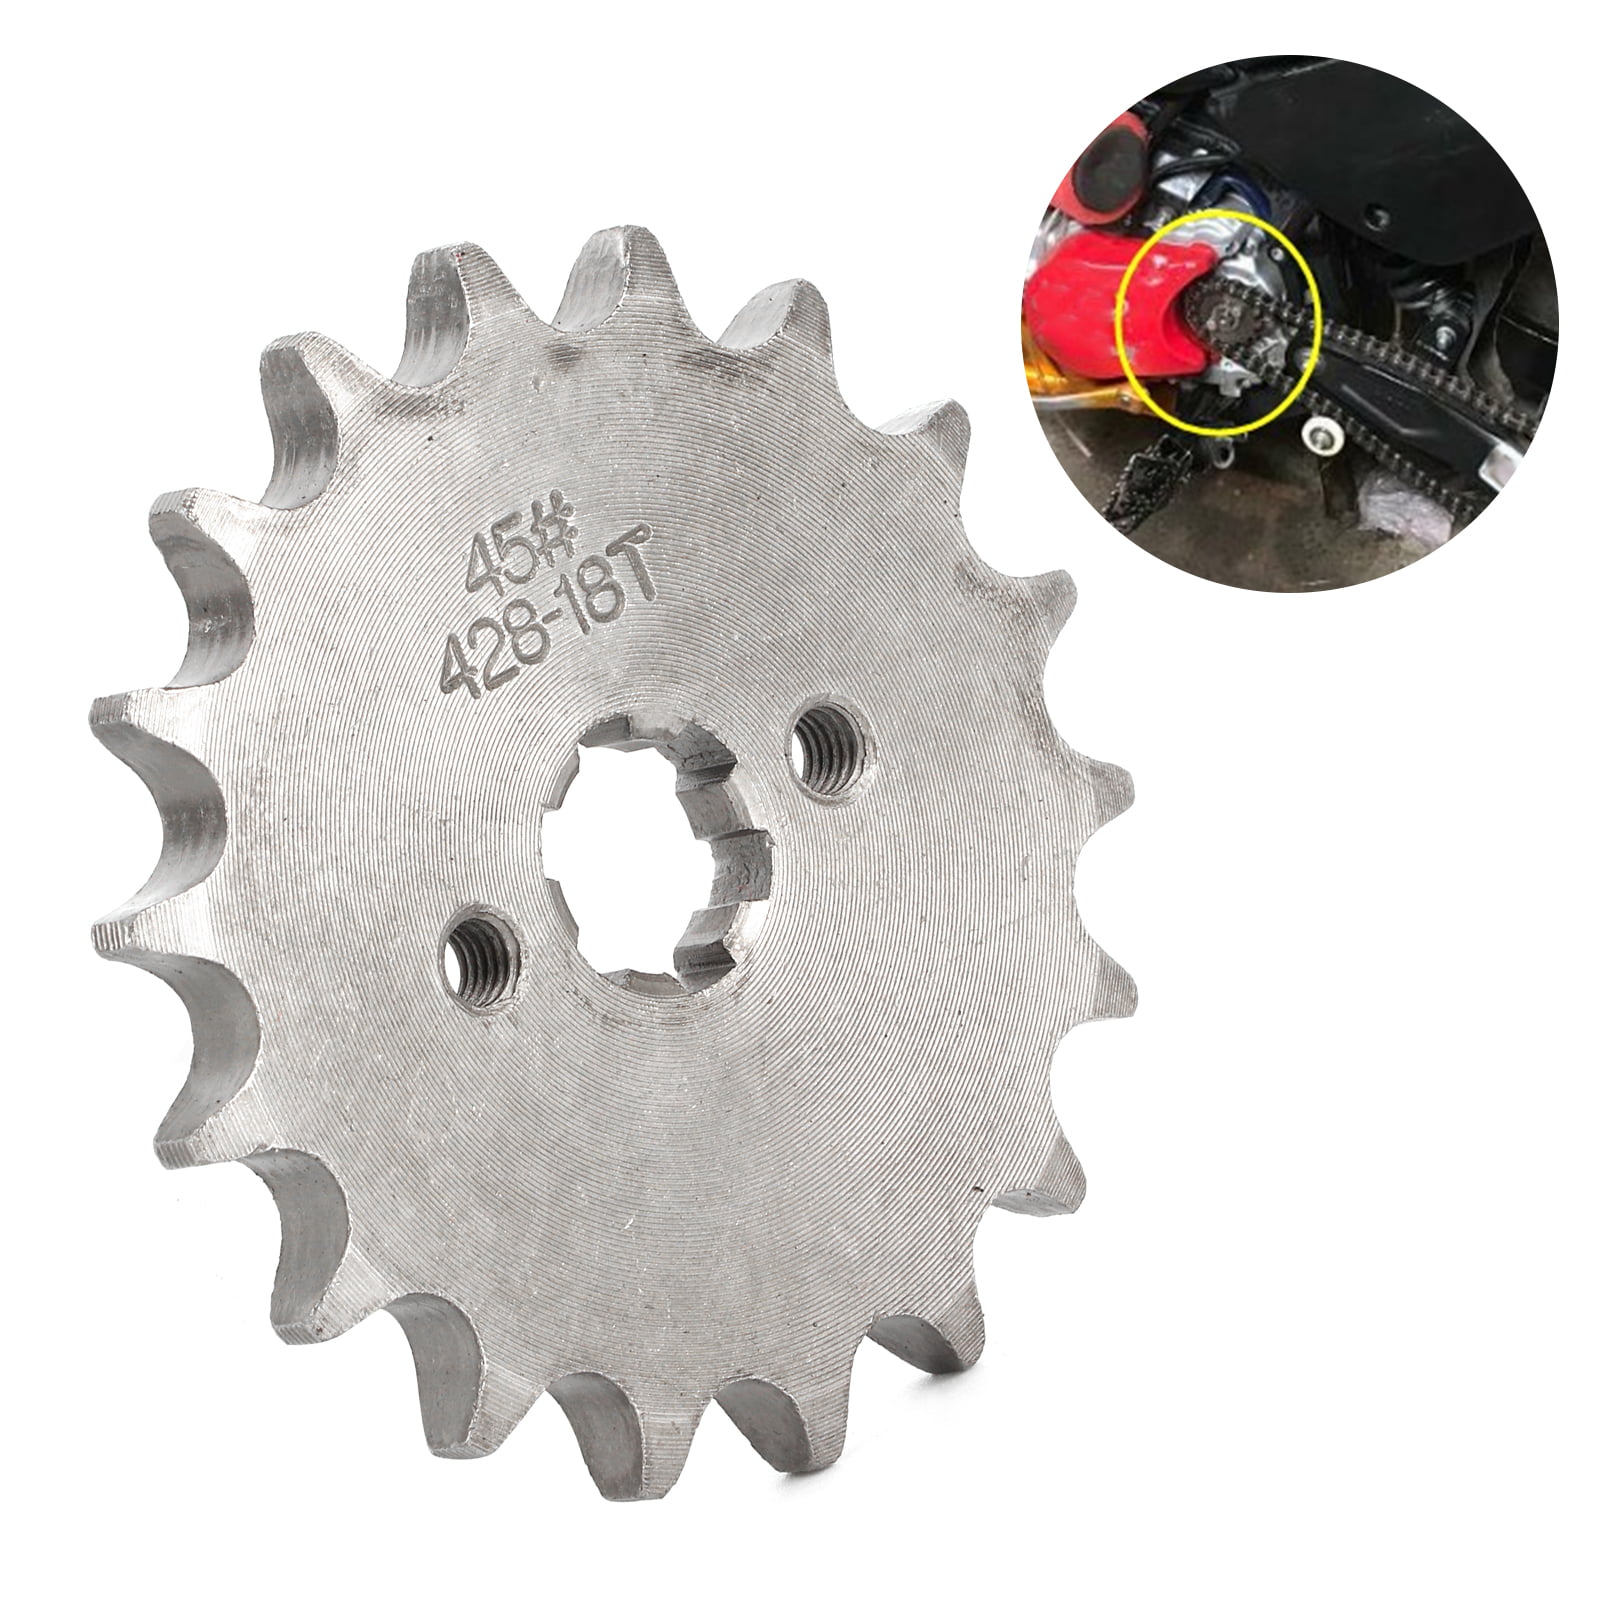 X-PRO 428 Chain 40 Tooth Rear Sprocket for 110cc 125cc 150cc ATVs 